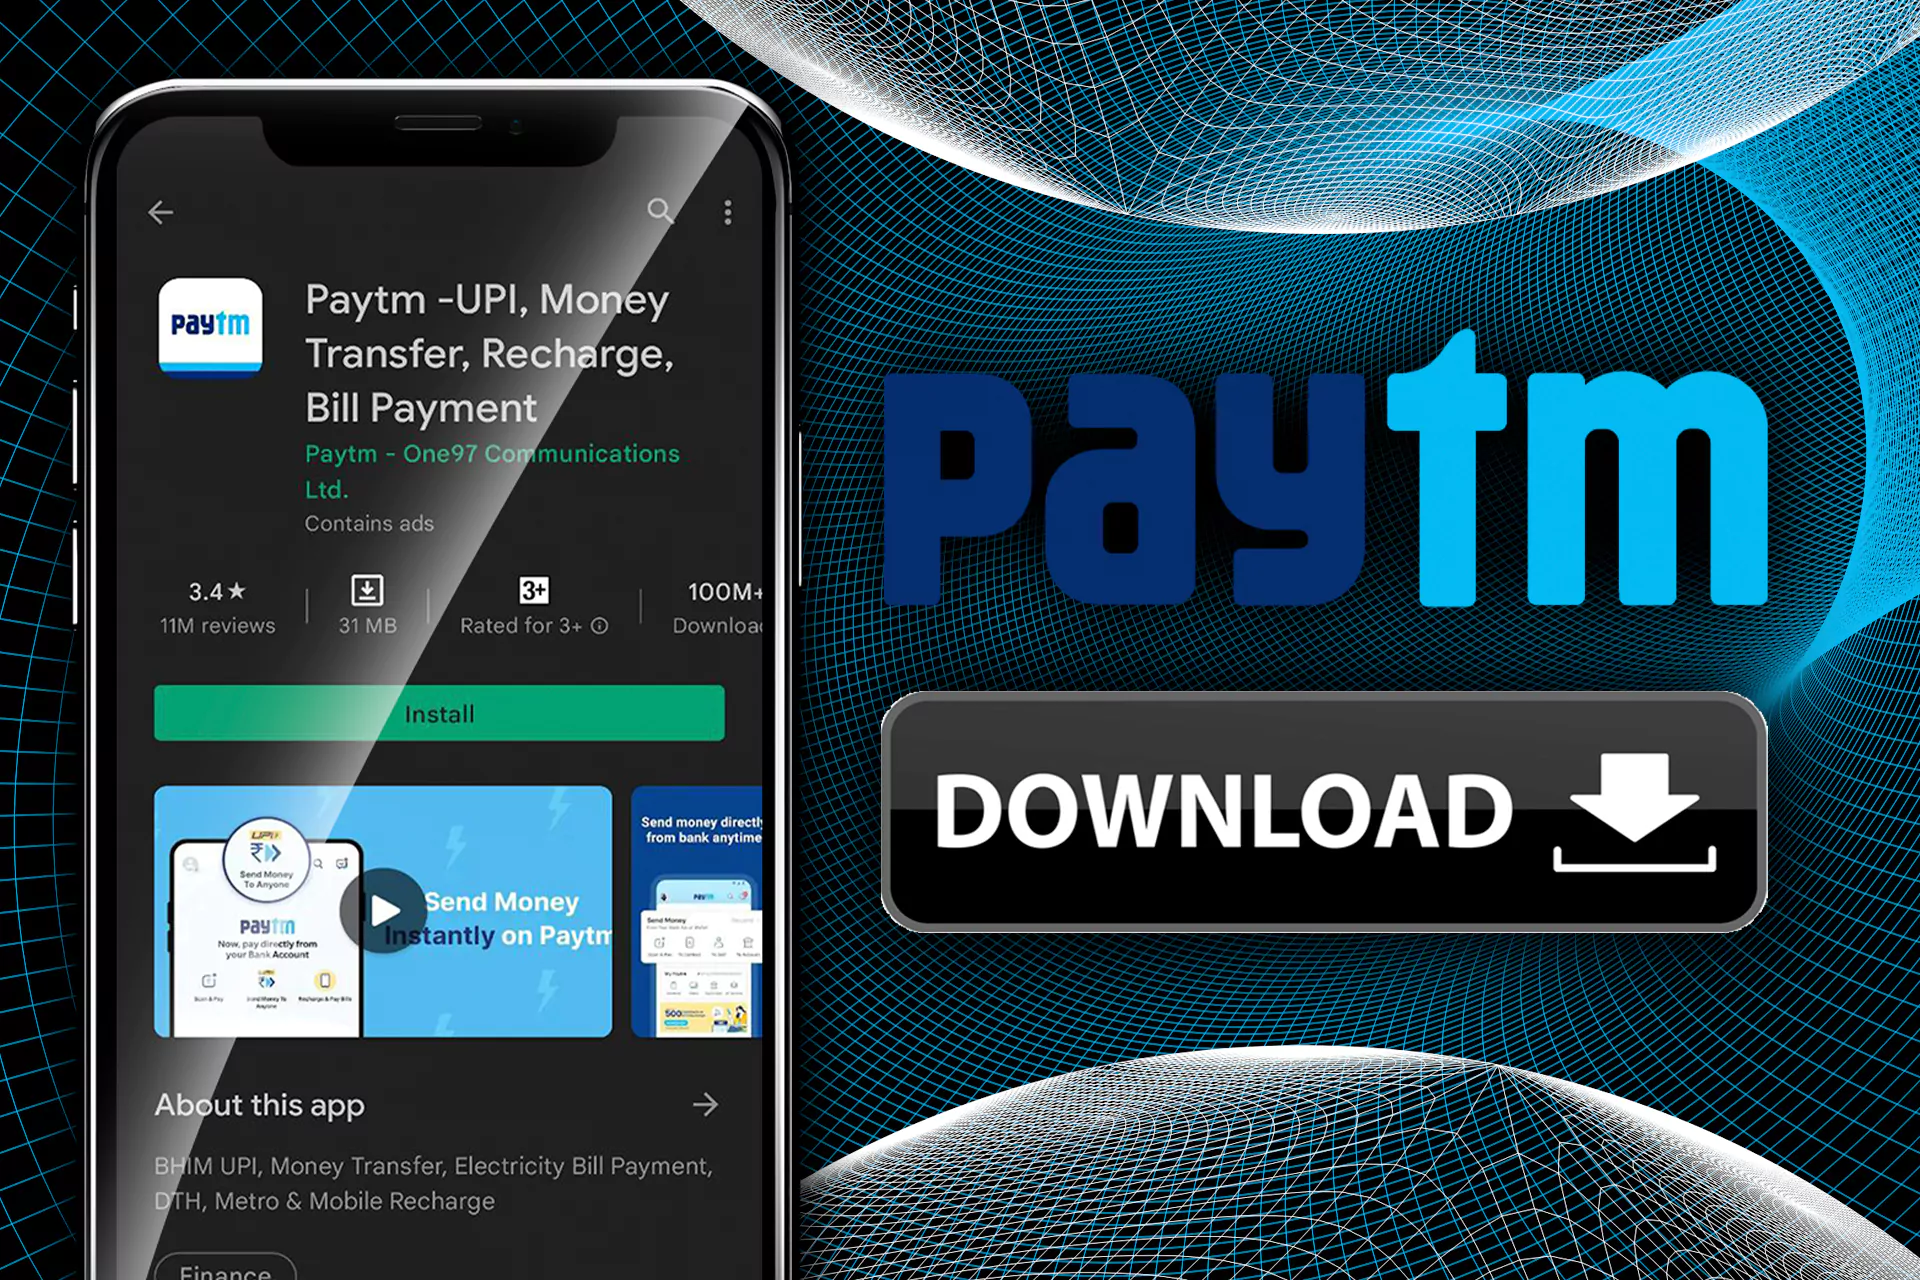 Download the Paytm app.